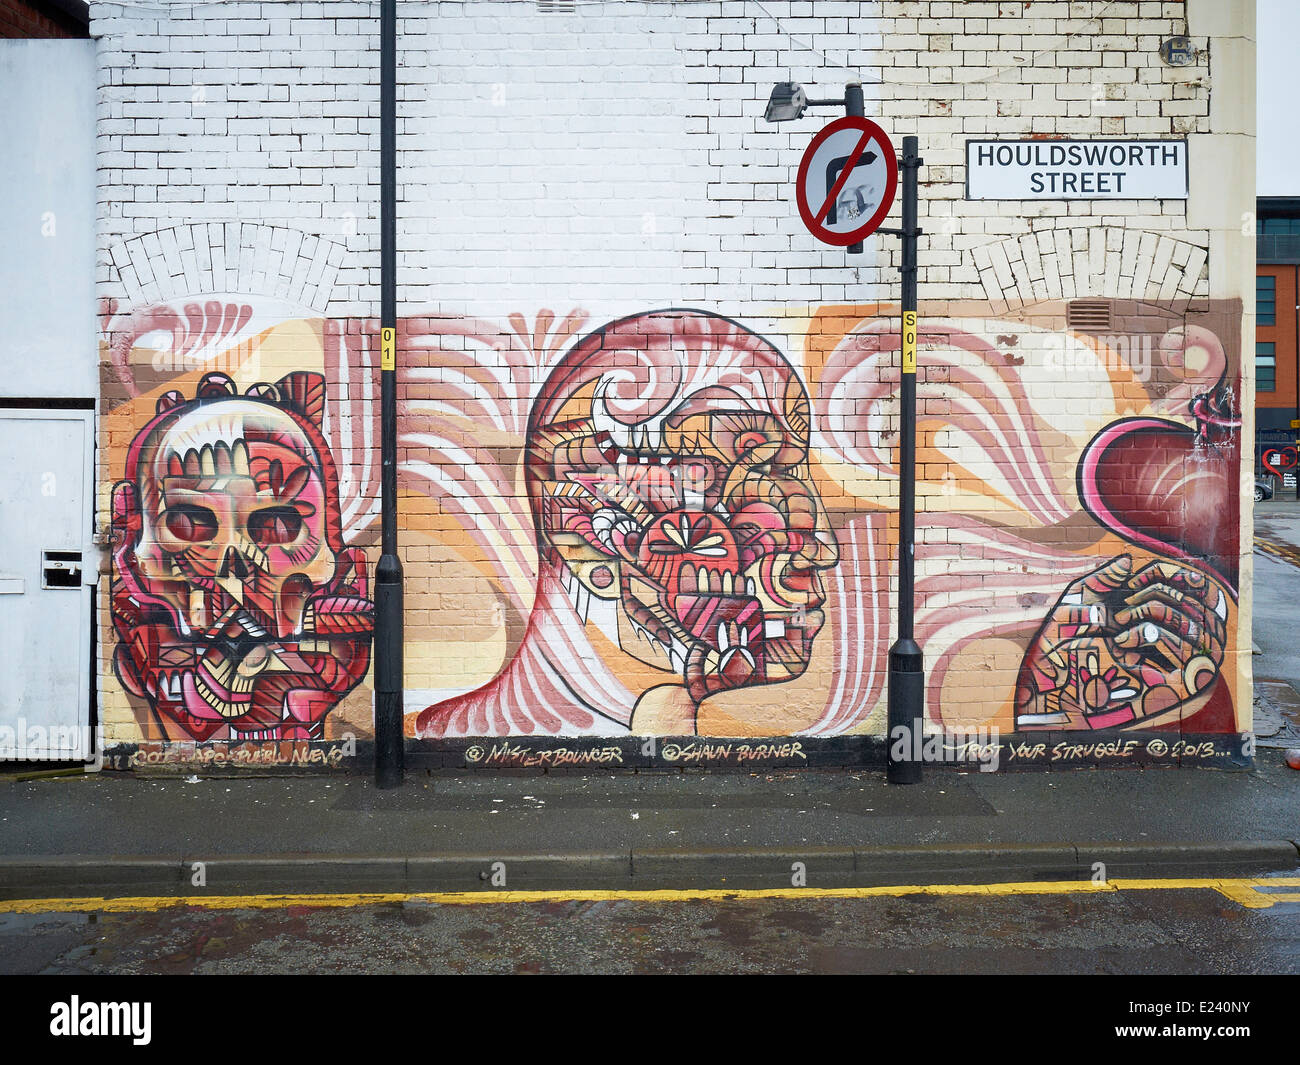 Graffiti on Houldsworth Street in Manchester UK Stock Photo